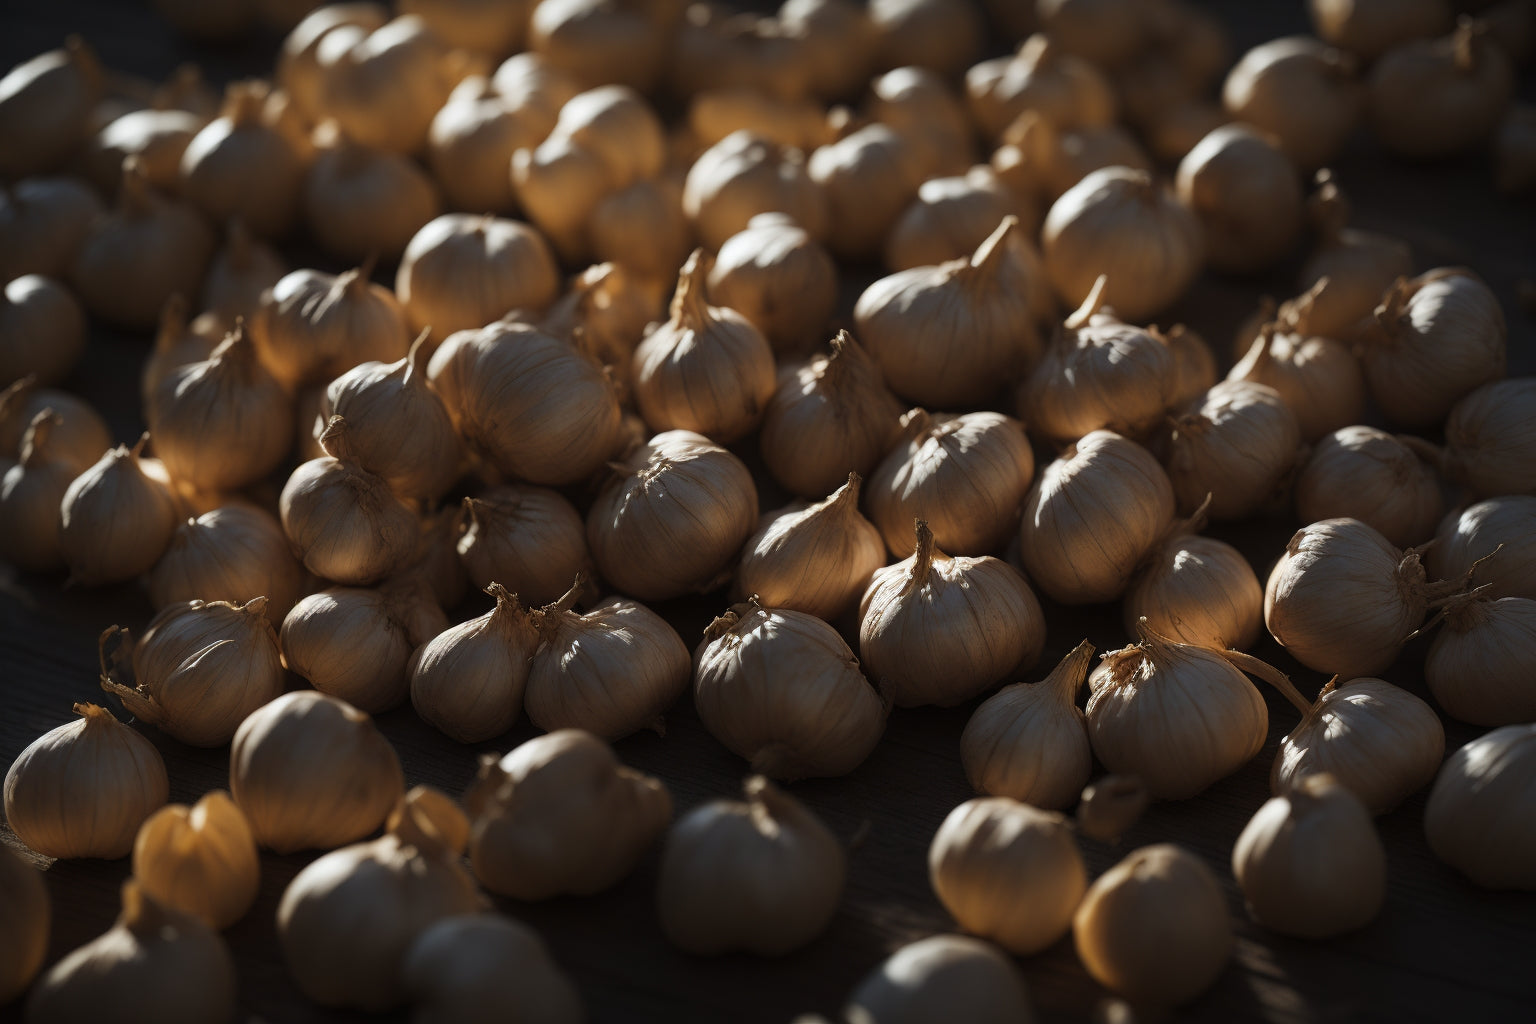 A close-up of a wooden table, covered in freshly harvested garlic bulbs, glistening in the sunlight.